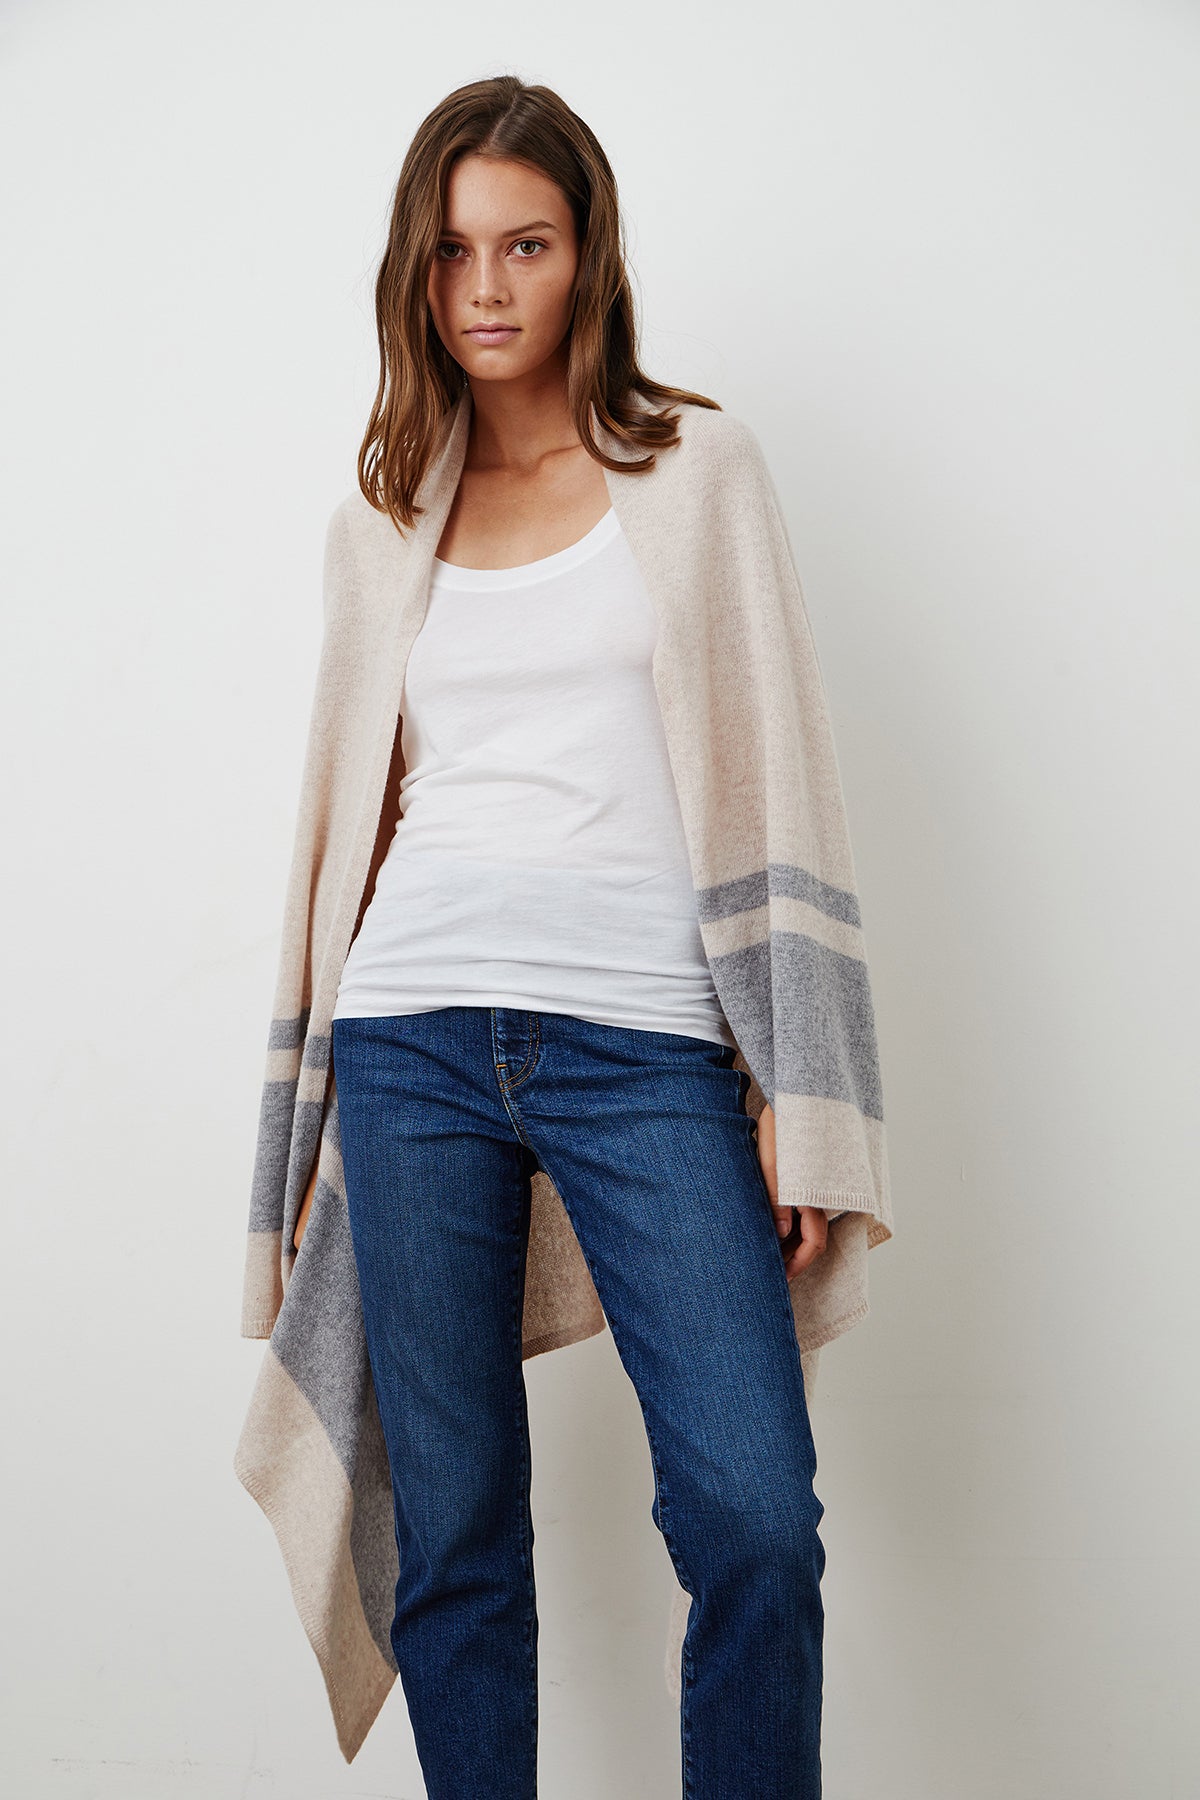 The model is wearing cozy LIV CASHMERE THROW BLANKET jeans and a beige striped cardigan from Jenny Graham Home.-15230754095297